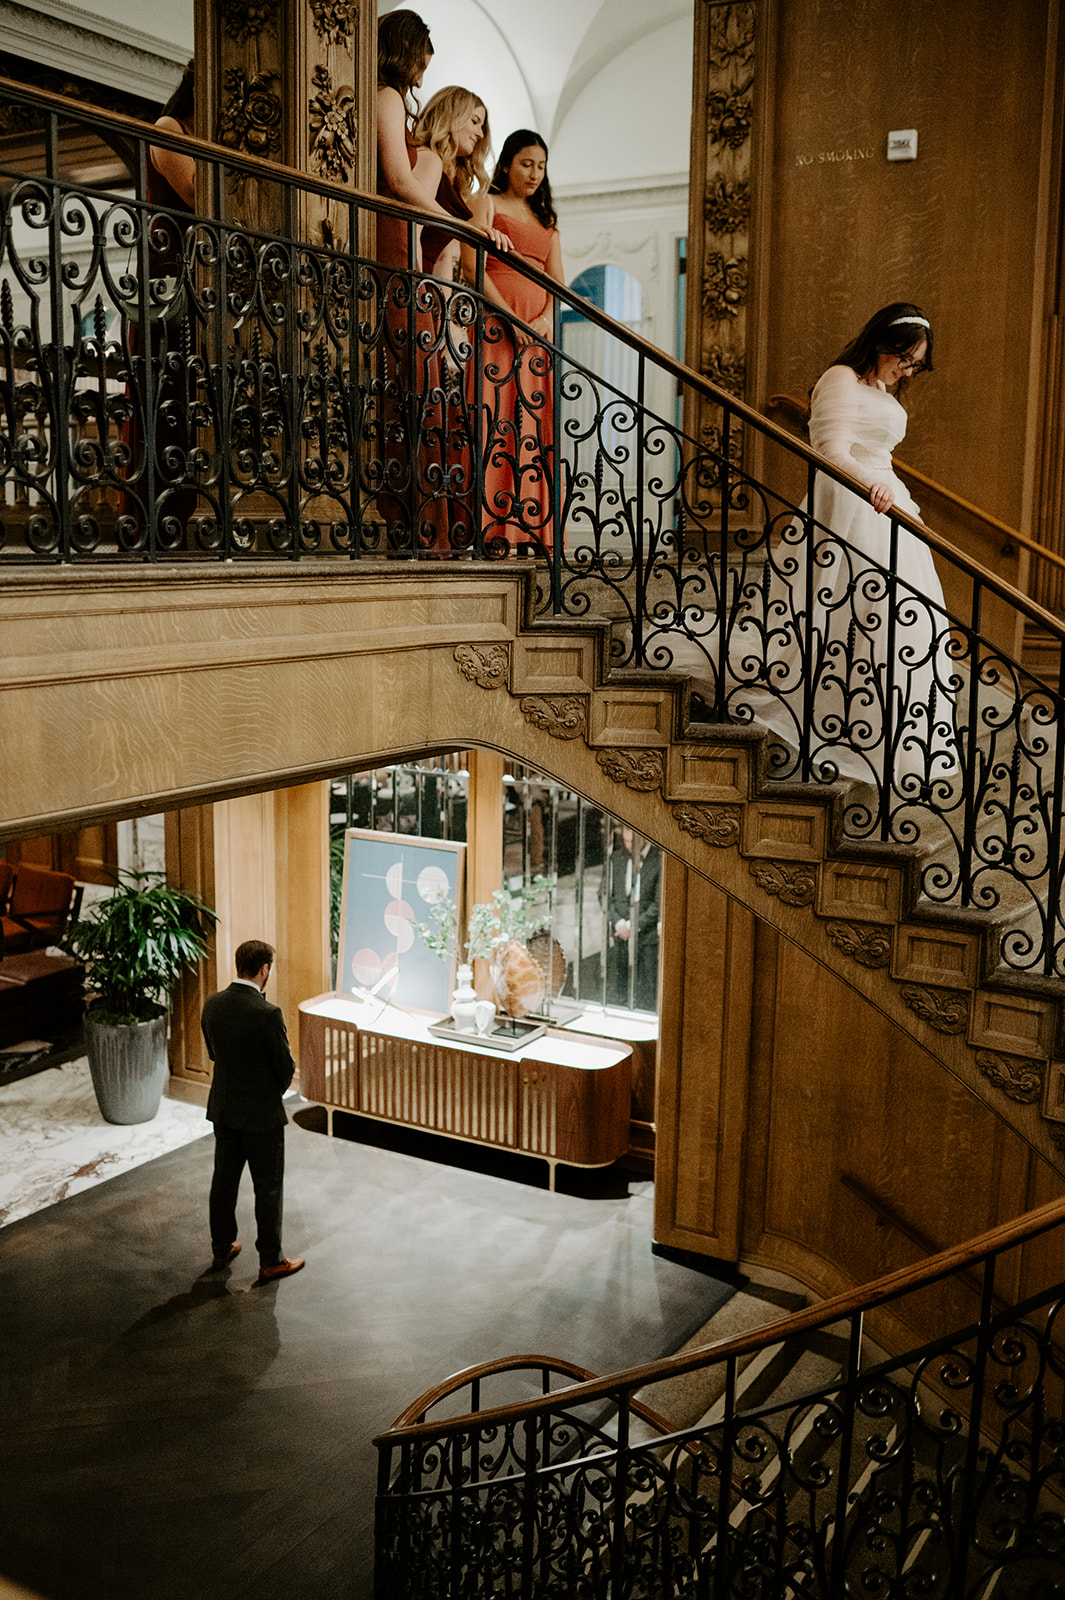 Bride descends an ornate staircase while bridesmaids look on and groom waits below at the Fairmont Olympic Hotel.